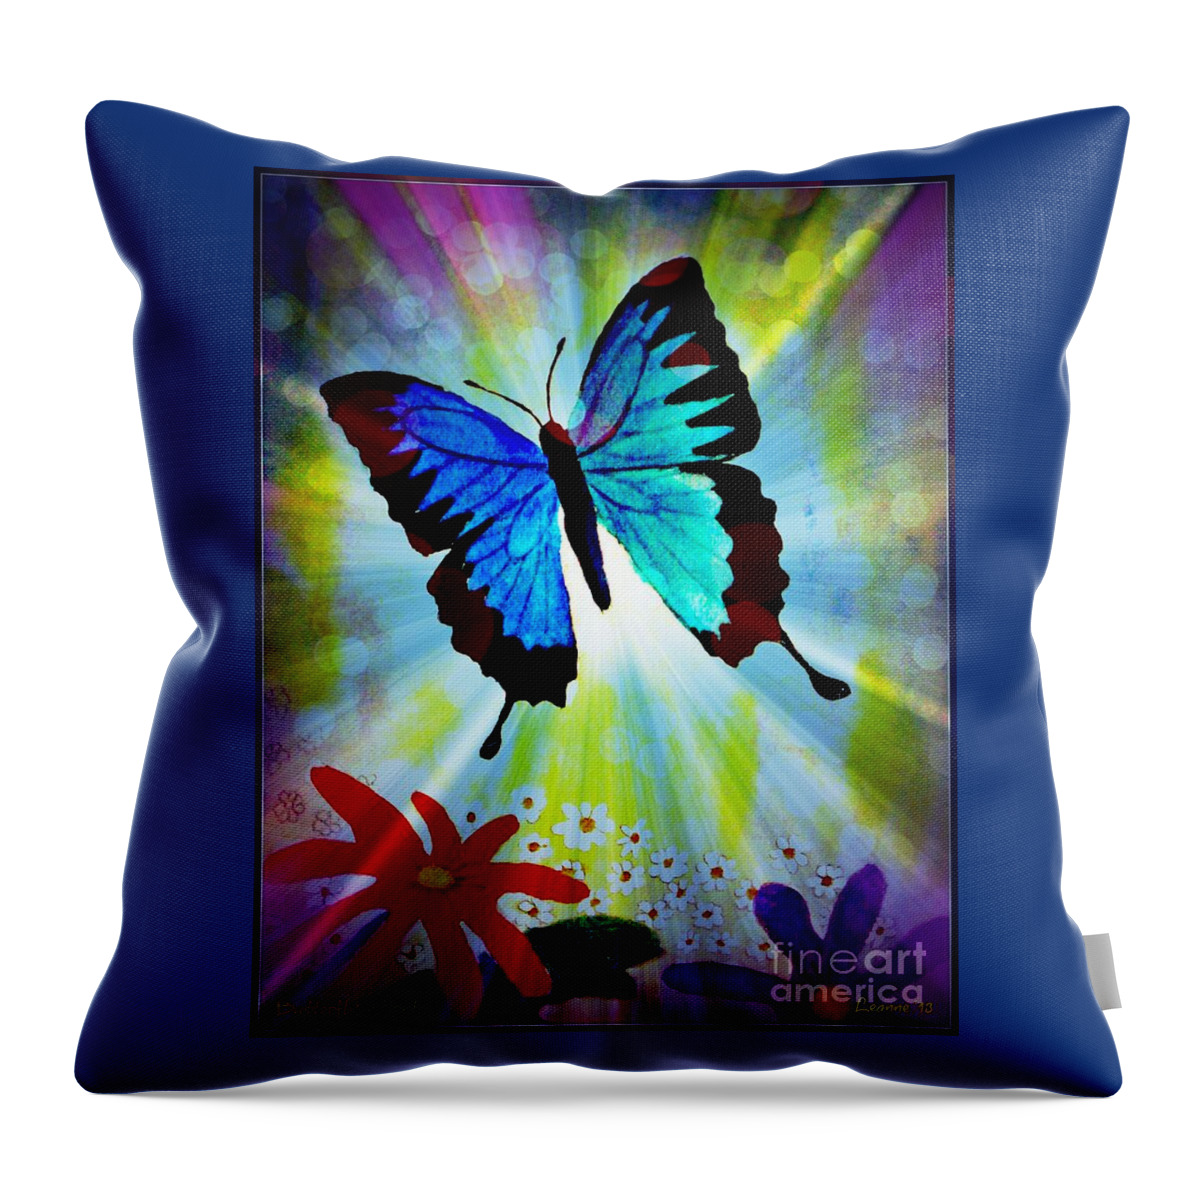 Butterfly Throw Pillow featuring the mixed media Transformation by Leanne Seymour